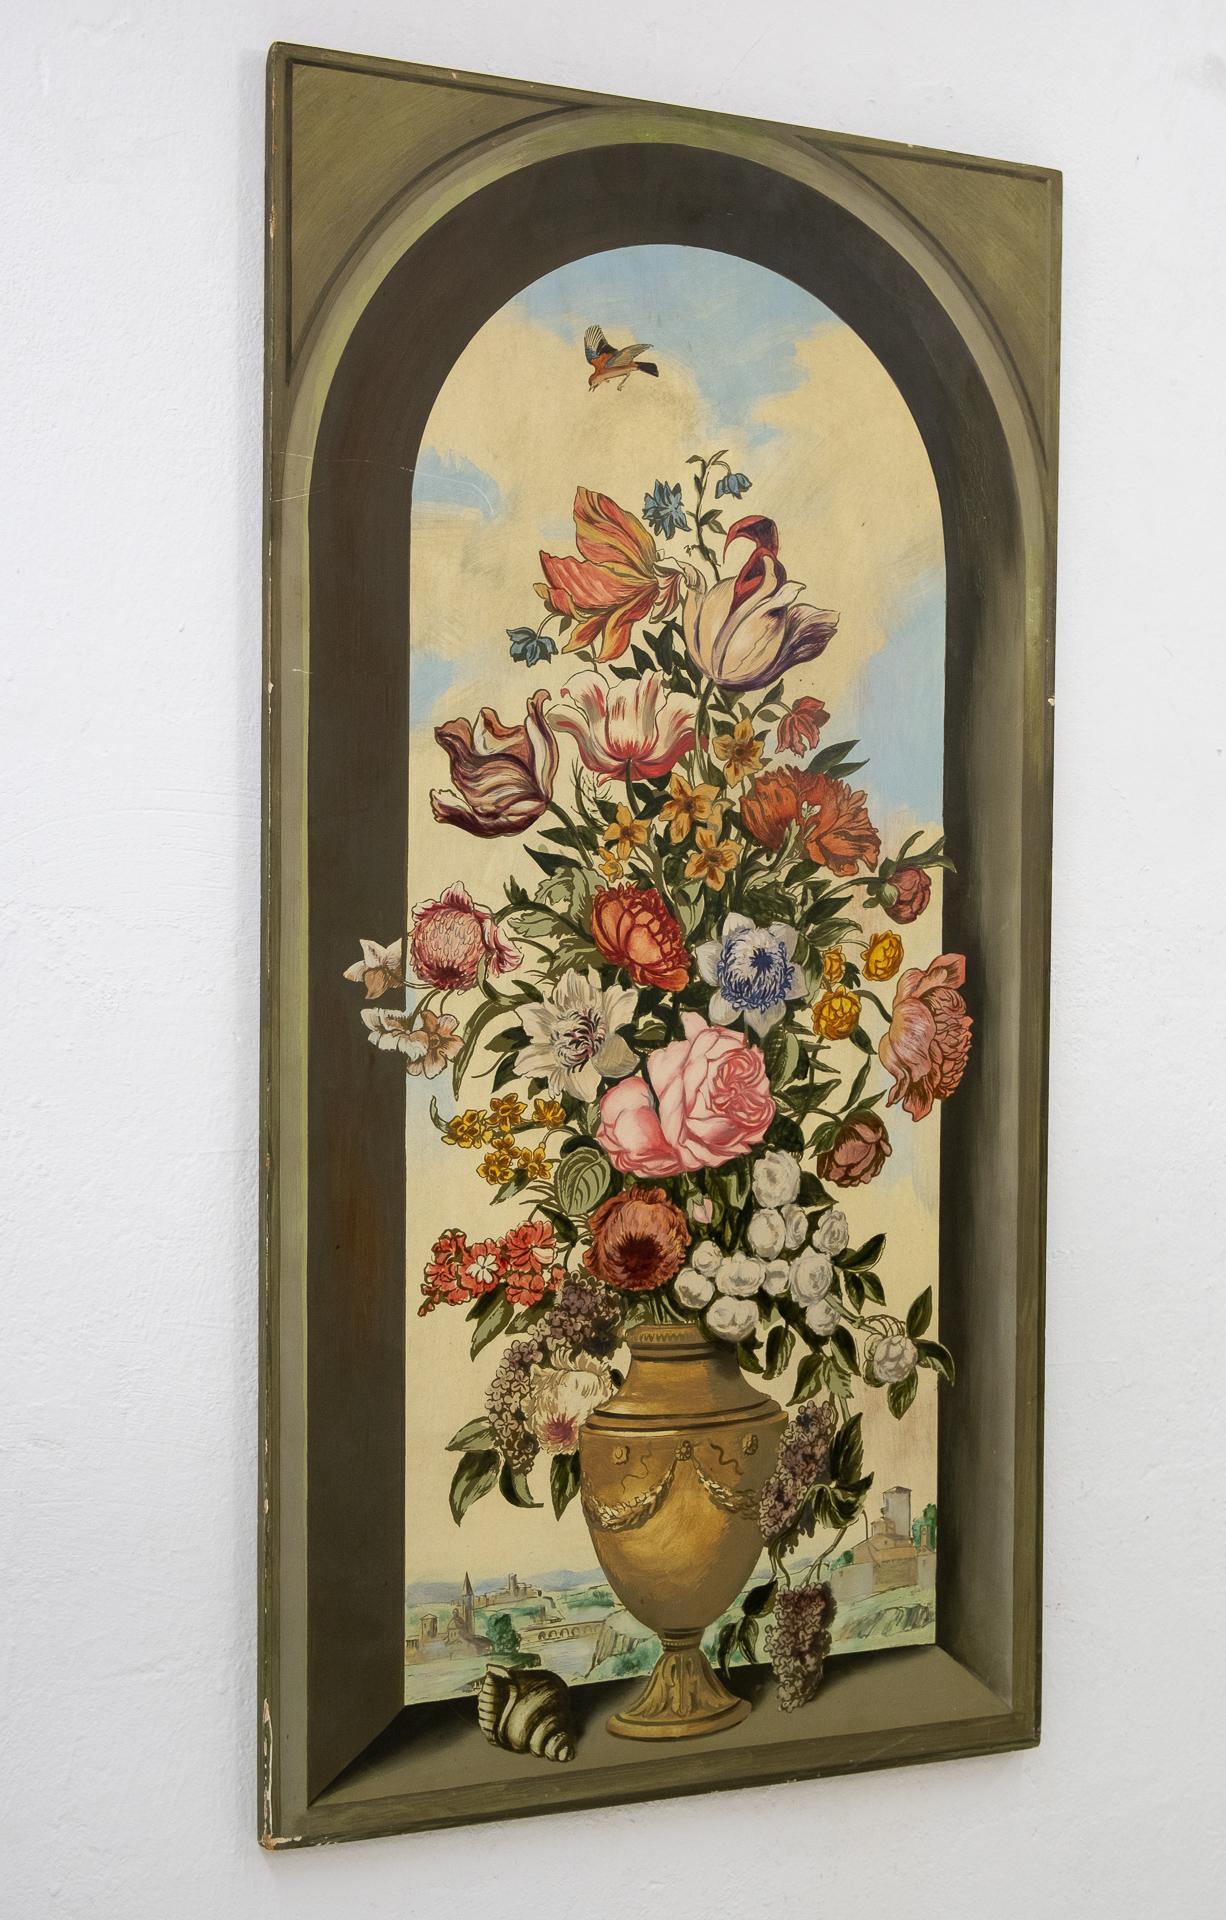 Trompe D' Euille wooden panel. Manufactured by Palladio Italy hand painted flower still live, 1960s
very nice picture. Signed.